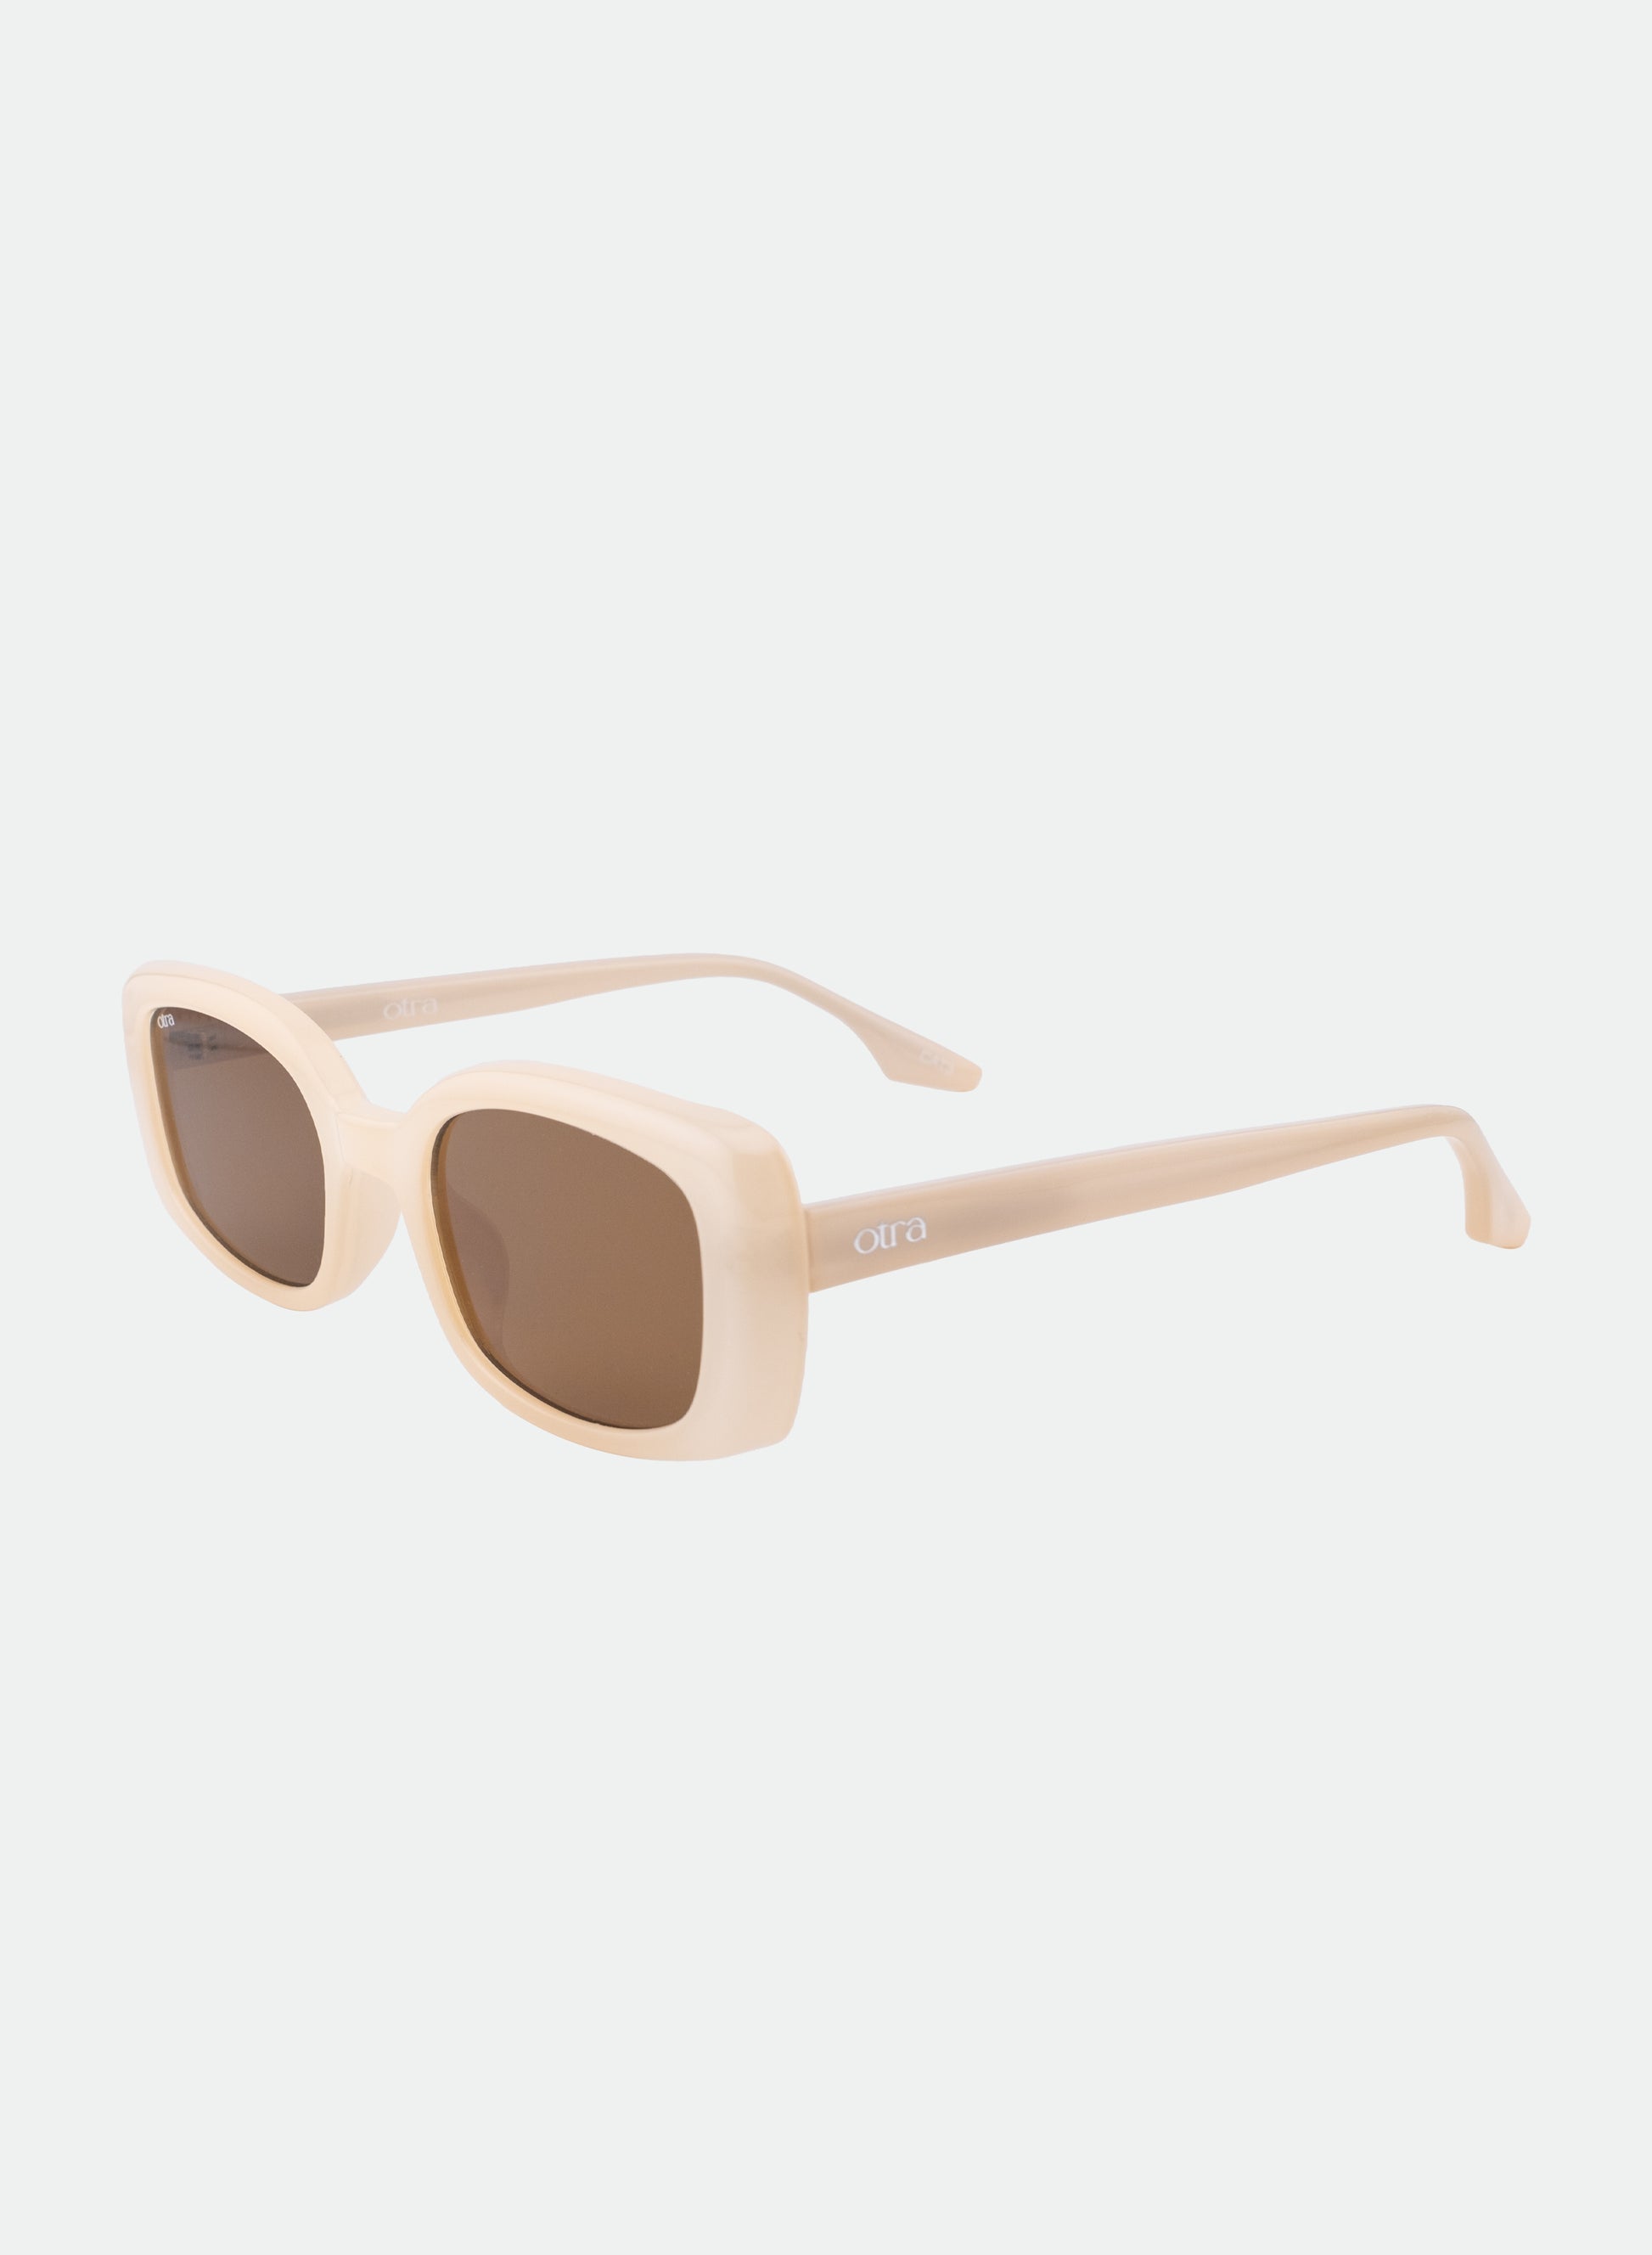 Daisy sunglasses in frosted ivory side view